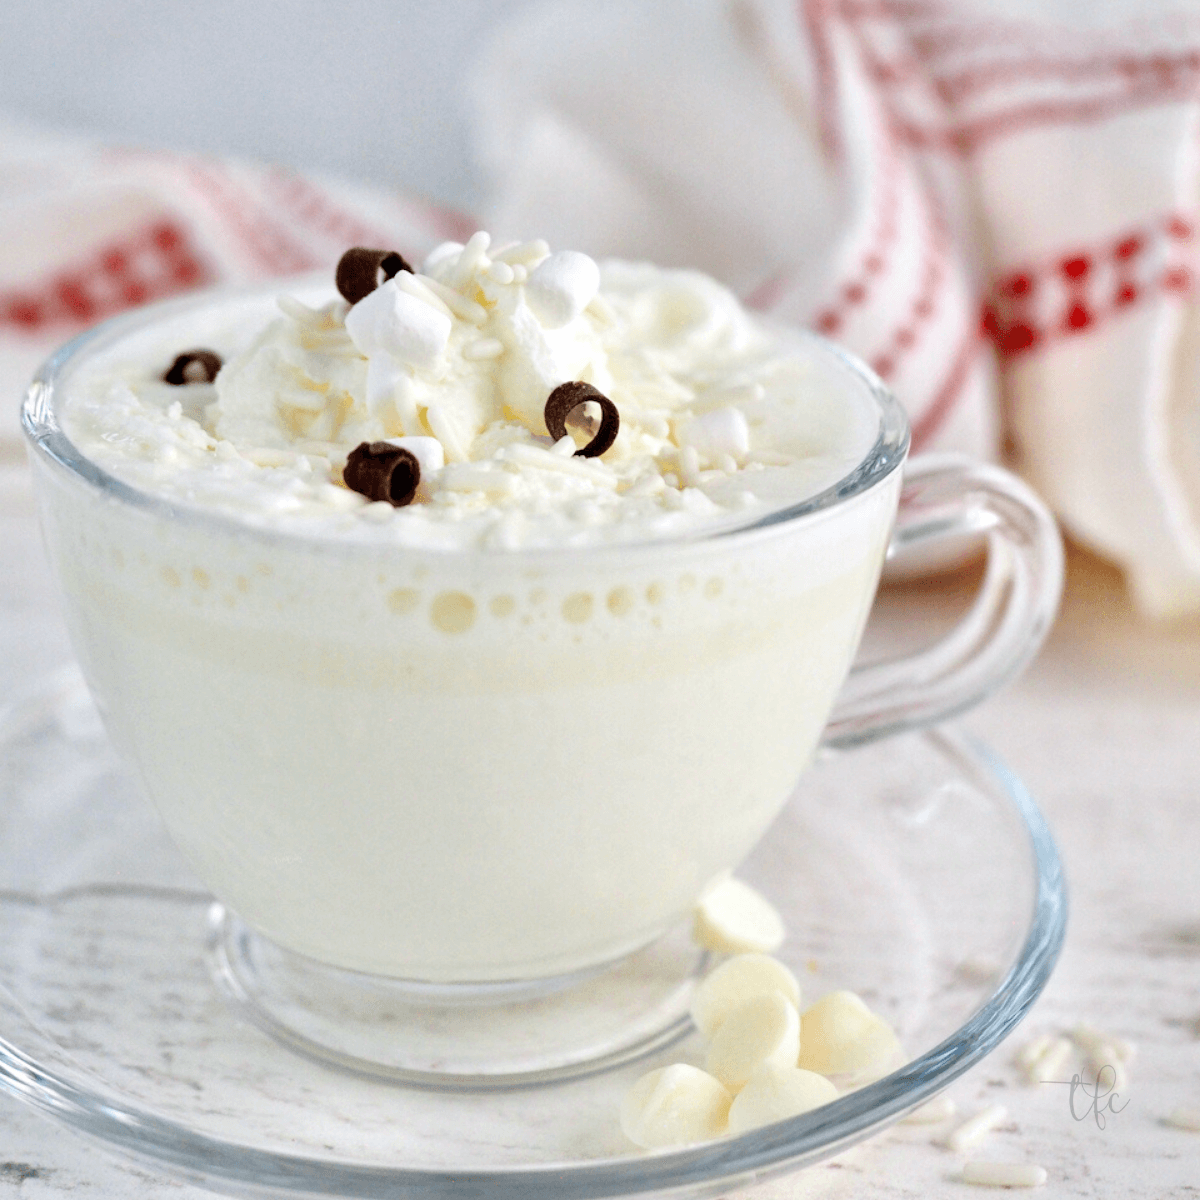 Starbucks Copycat White Hot Chocolate square image in clear glass teacup mug with whipped cream, white chocolate chips, chocolate curls and mimi marshmallows.